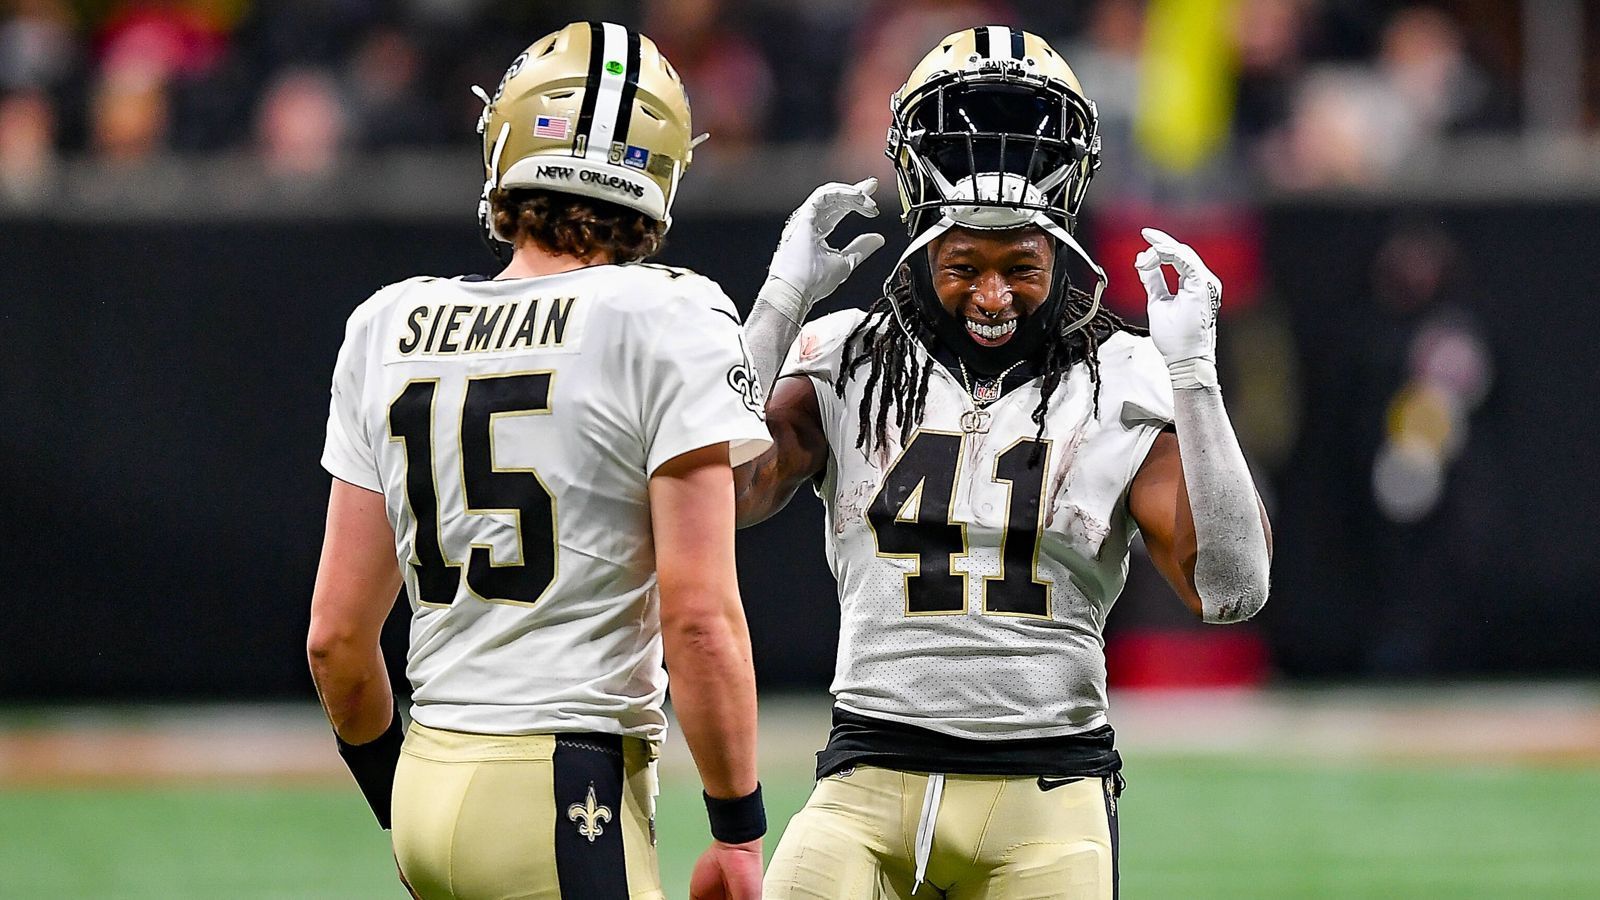 
                <strong>Draft-Pick 16: New Orleans Saints (via Indianapolis Colts)</strong><br>
                &#x2022; Saison-Bilanz Colts: 9-8<br>&#x2022; Strength of Schedule Colts: 0,495<br>
              